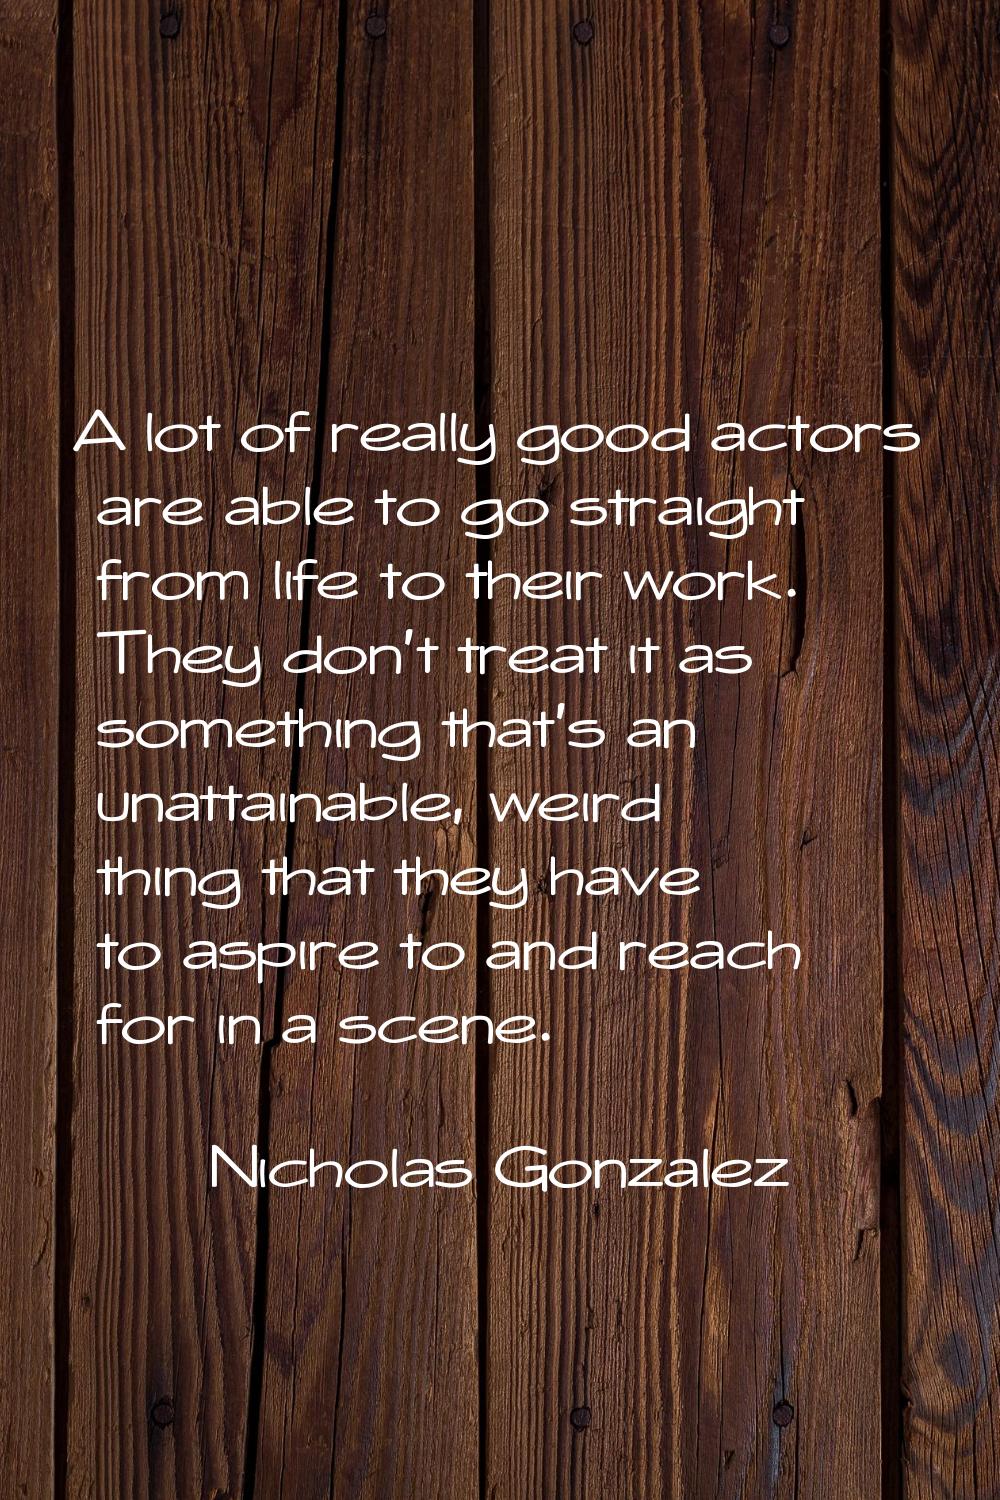 A lot of really good actors are able to go straight from life to their work. They don't treat it as